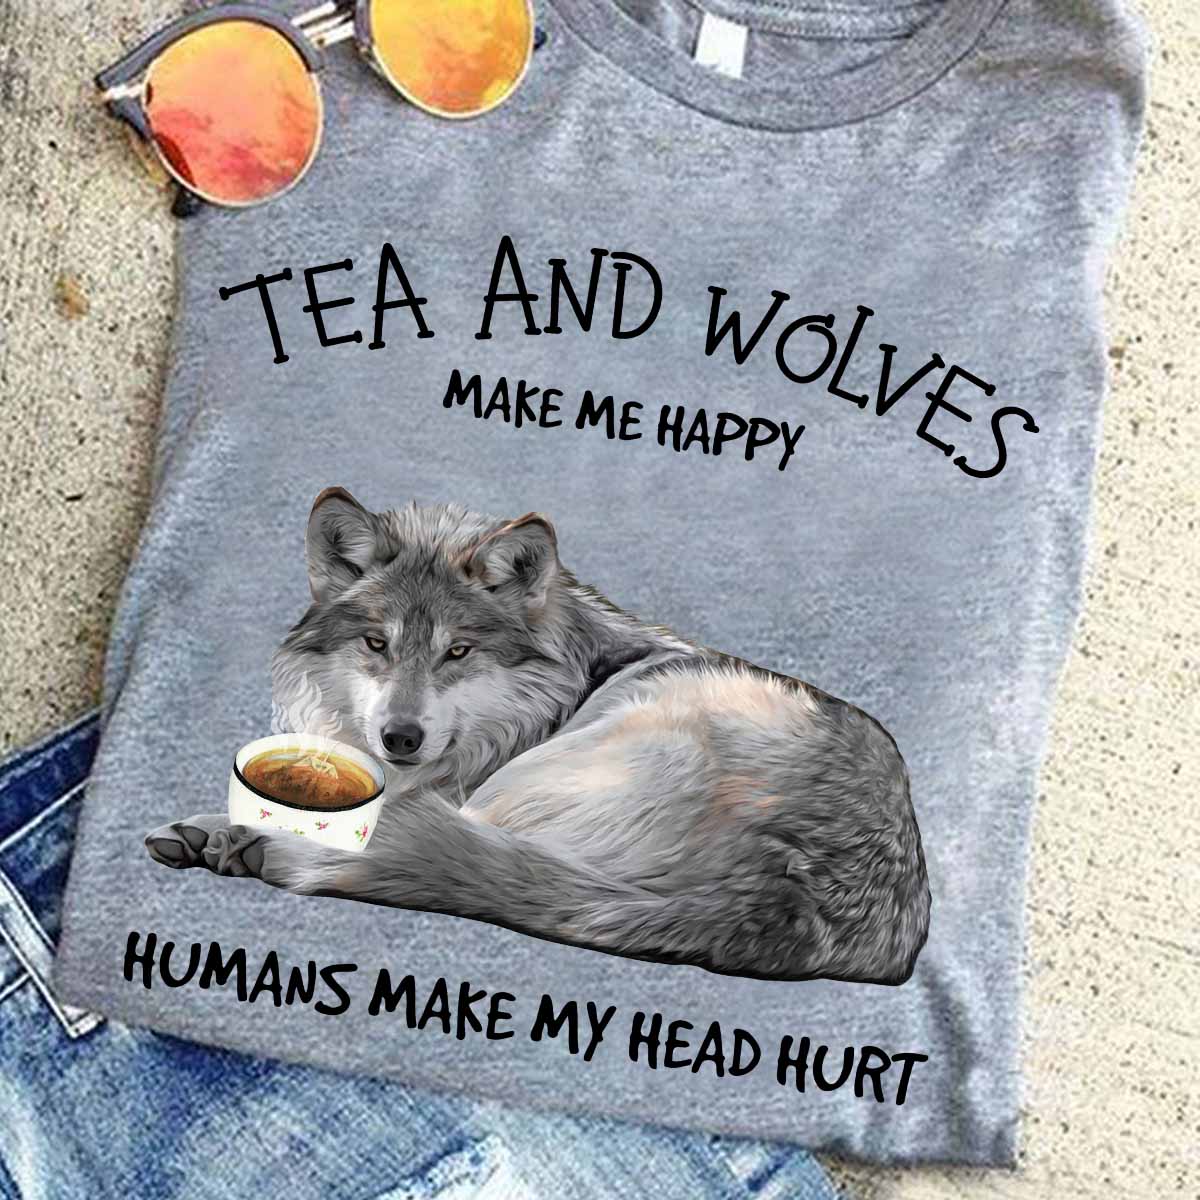 Tea and wolves make me happy humans make my head hurt - Tea and wolves